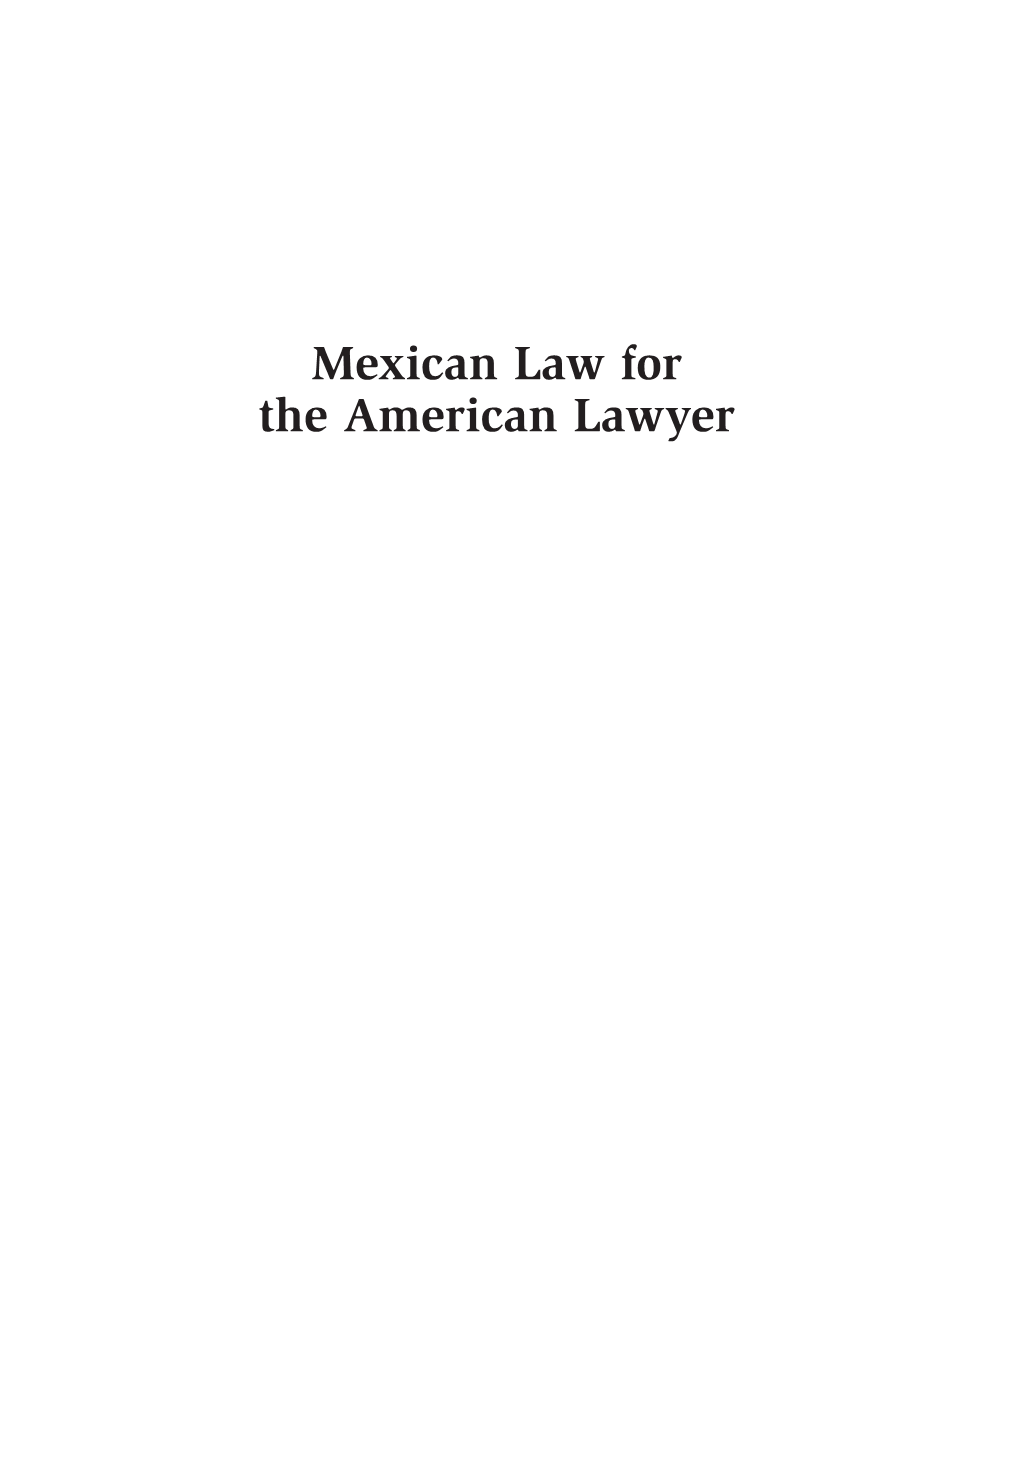 Mexican Law for the American Lawyer 00 Vargas Final 7/1/09 10:48 AM Page Ii 00 Vargas Final 7/1/09 10:48 AM Page Iii